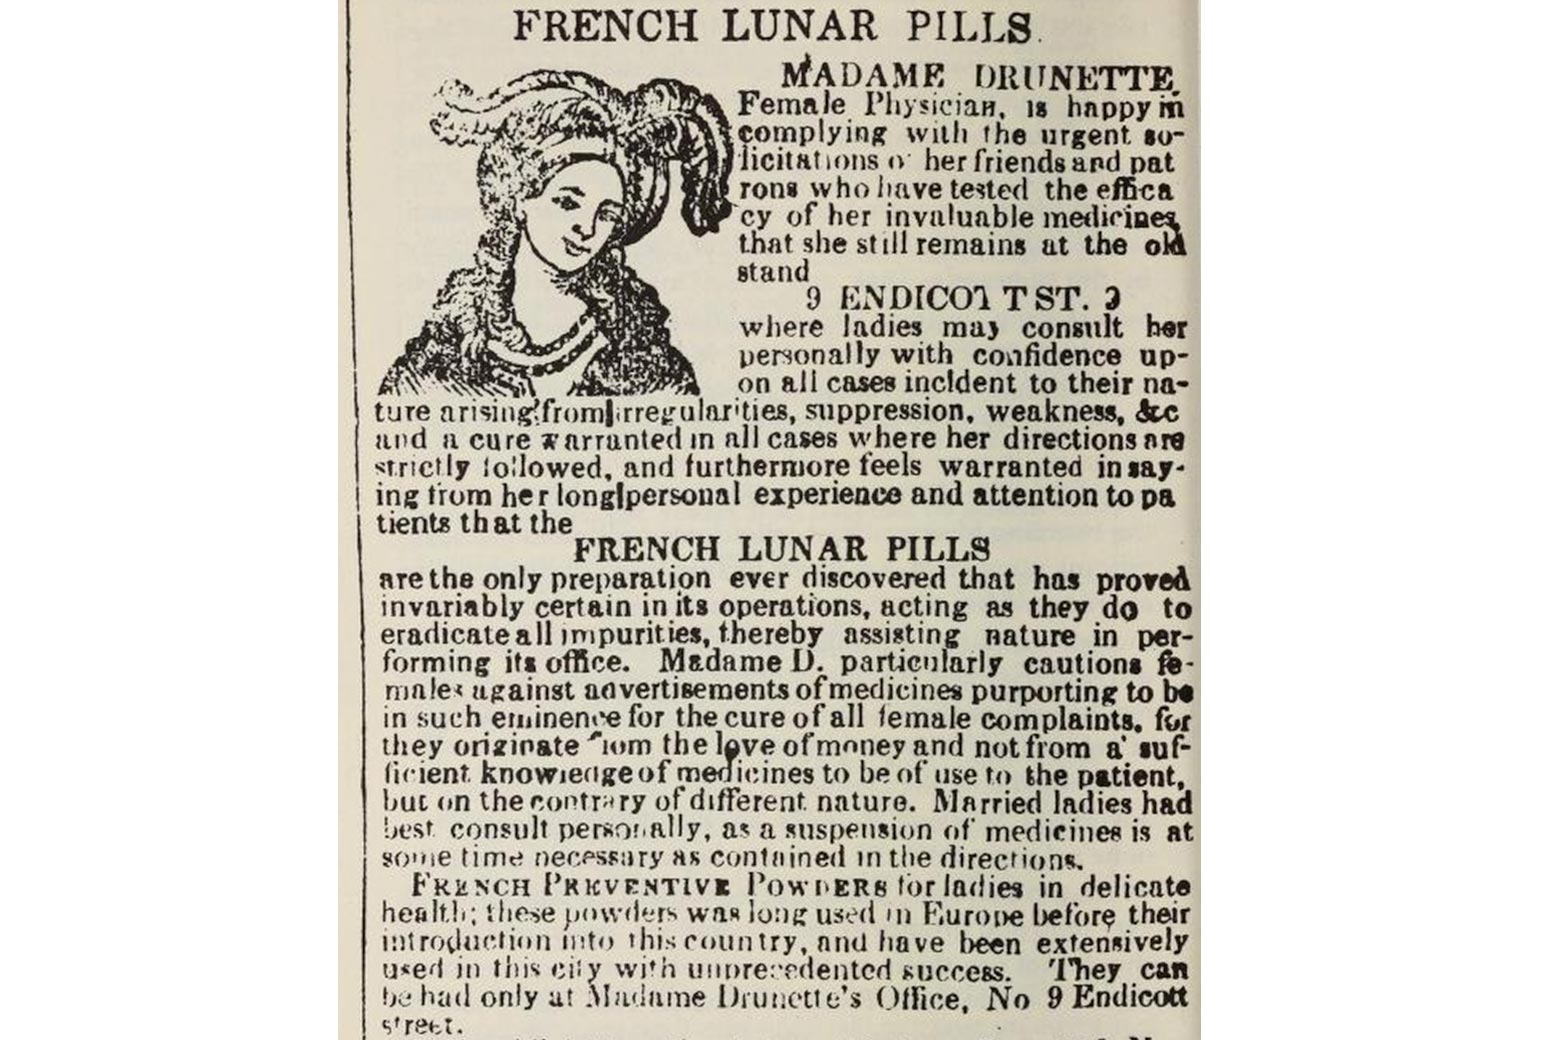 Newspaper clipping titled "French Lunar Pills"